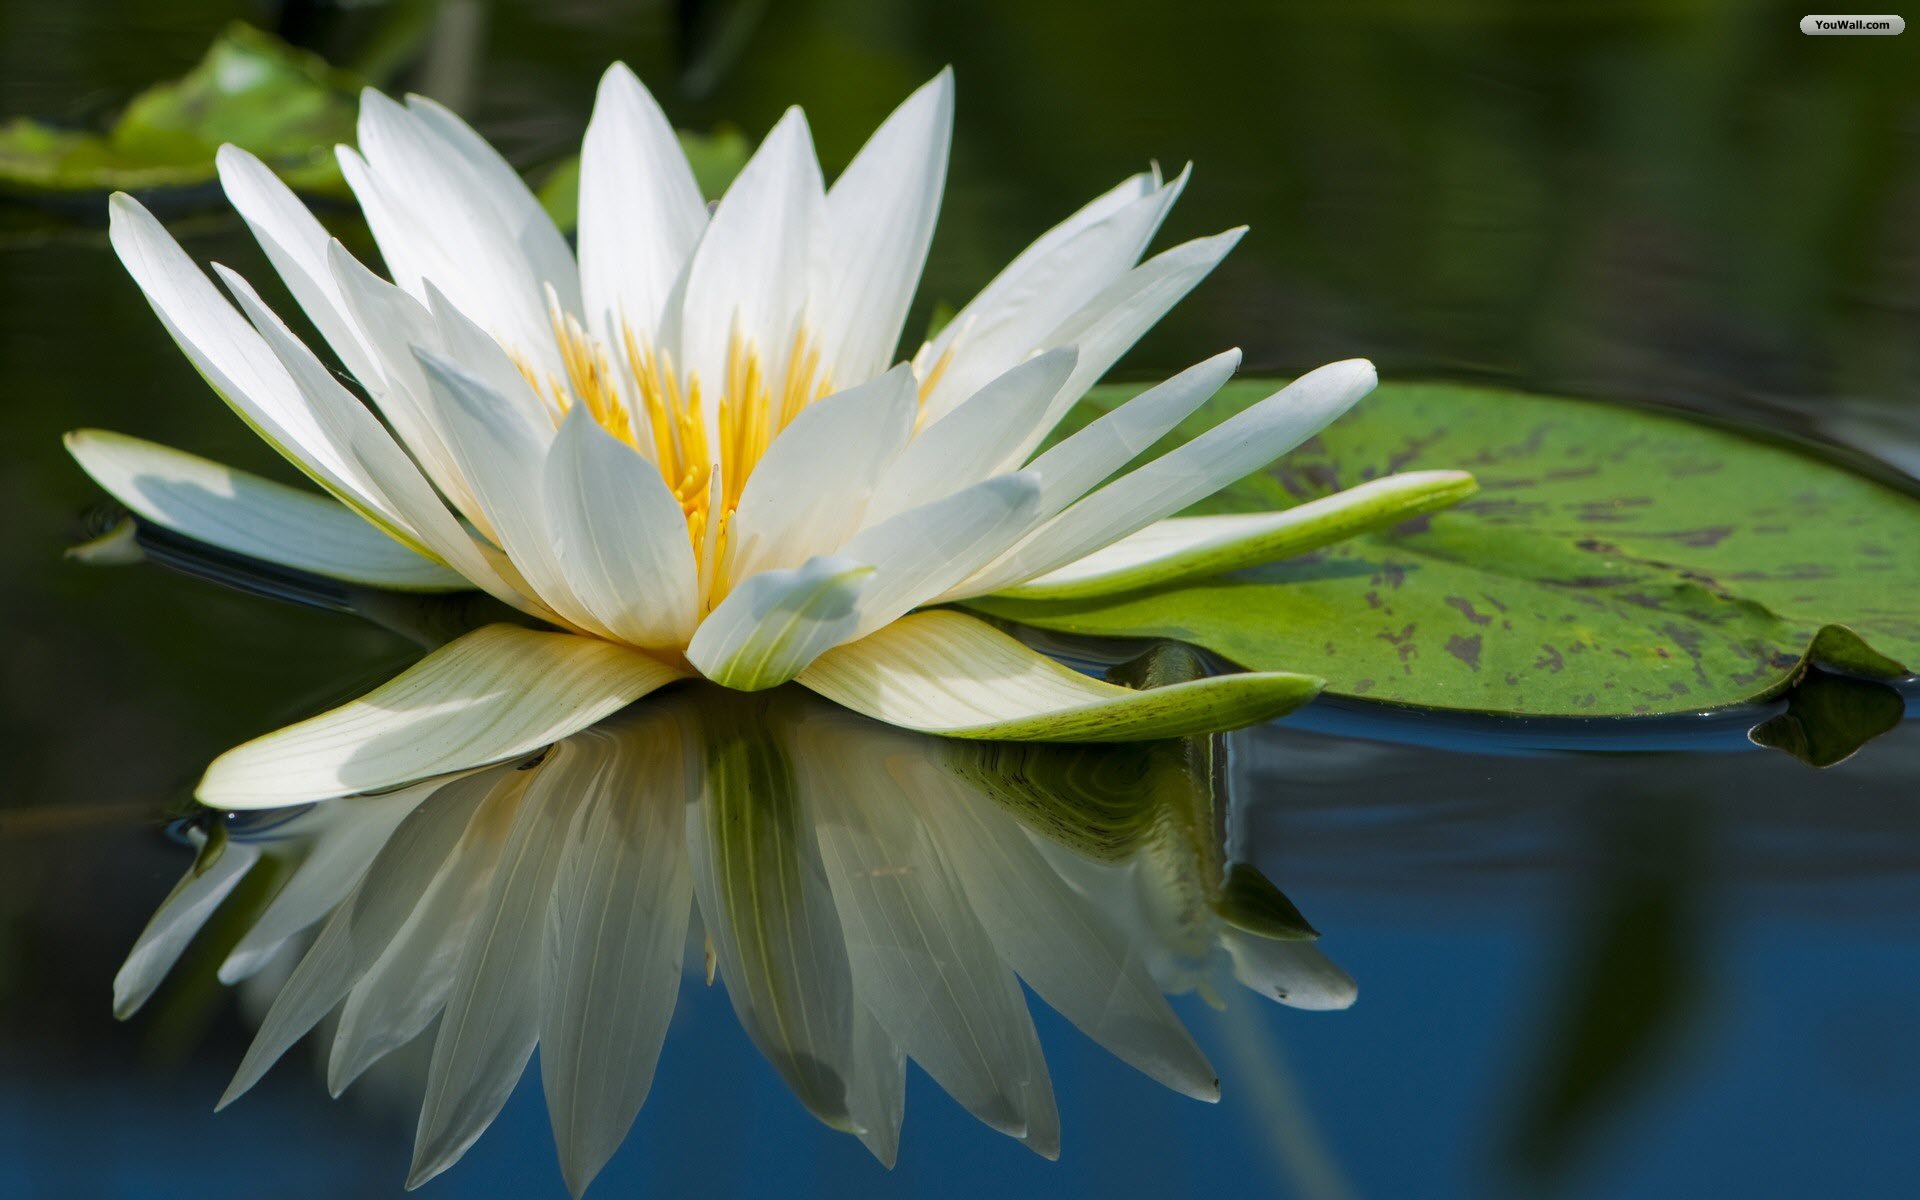 Youwall Water Lily Wallpaper